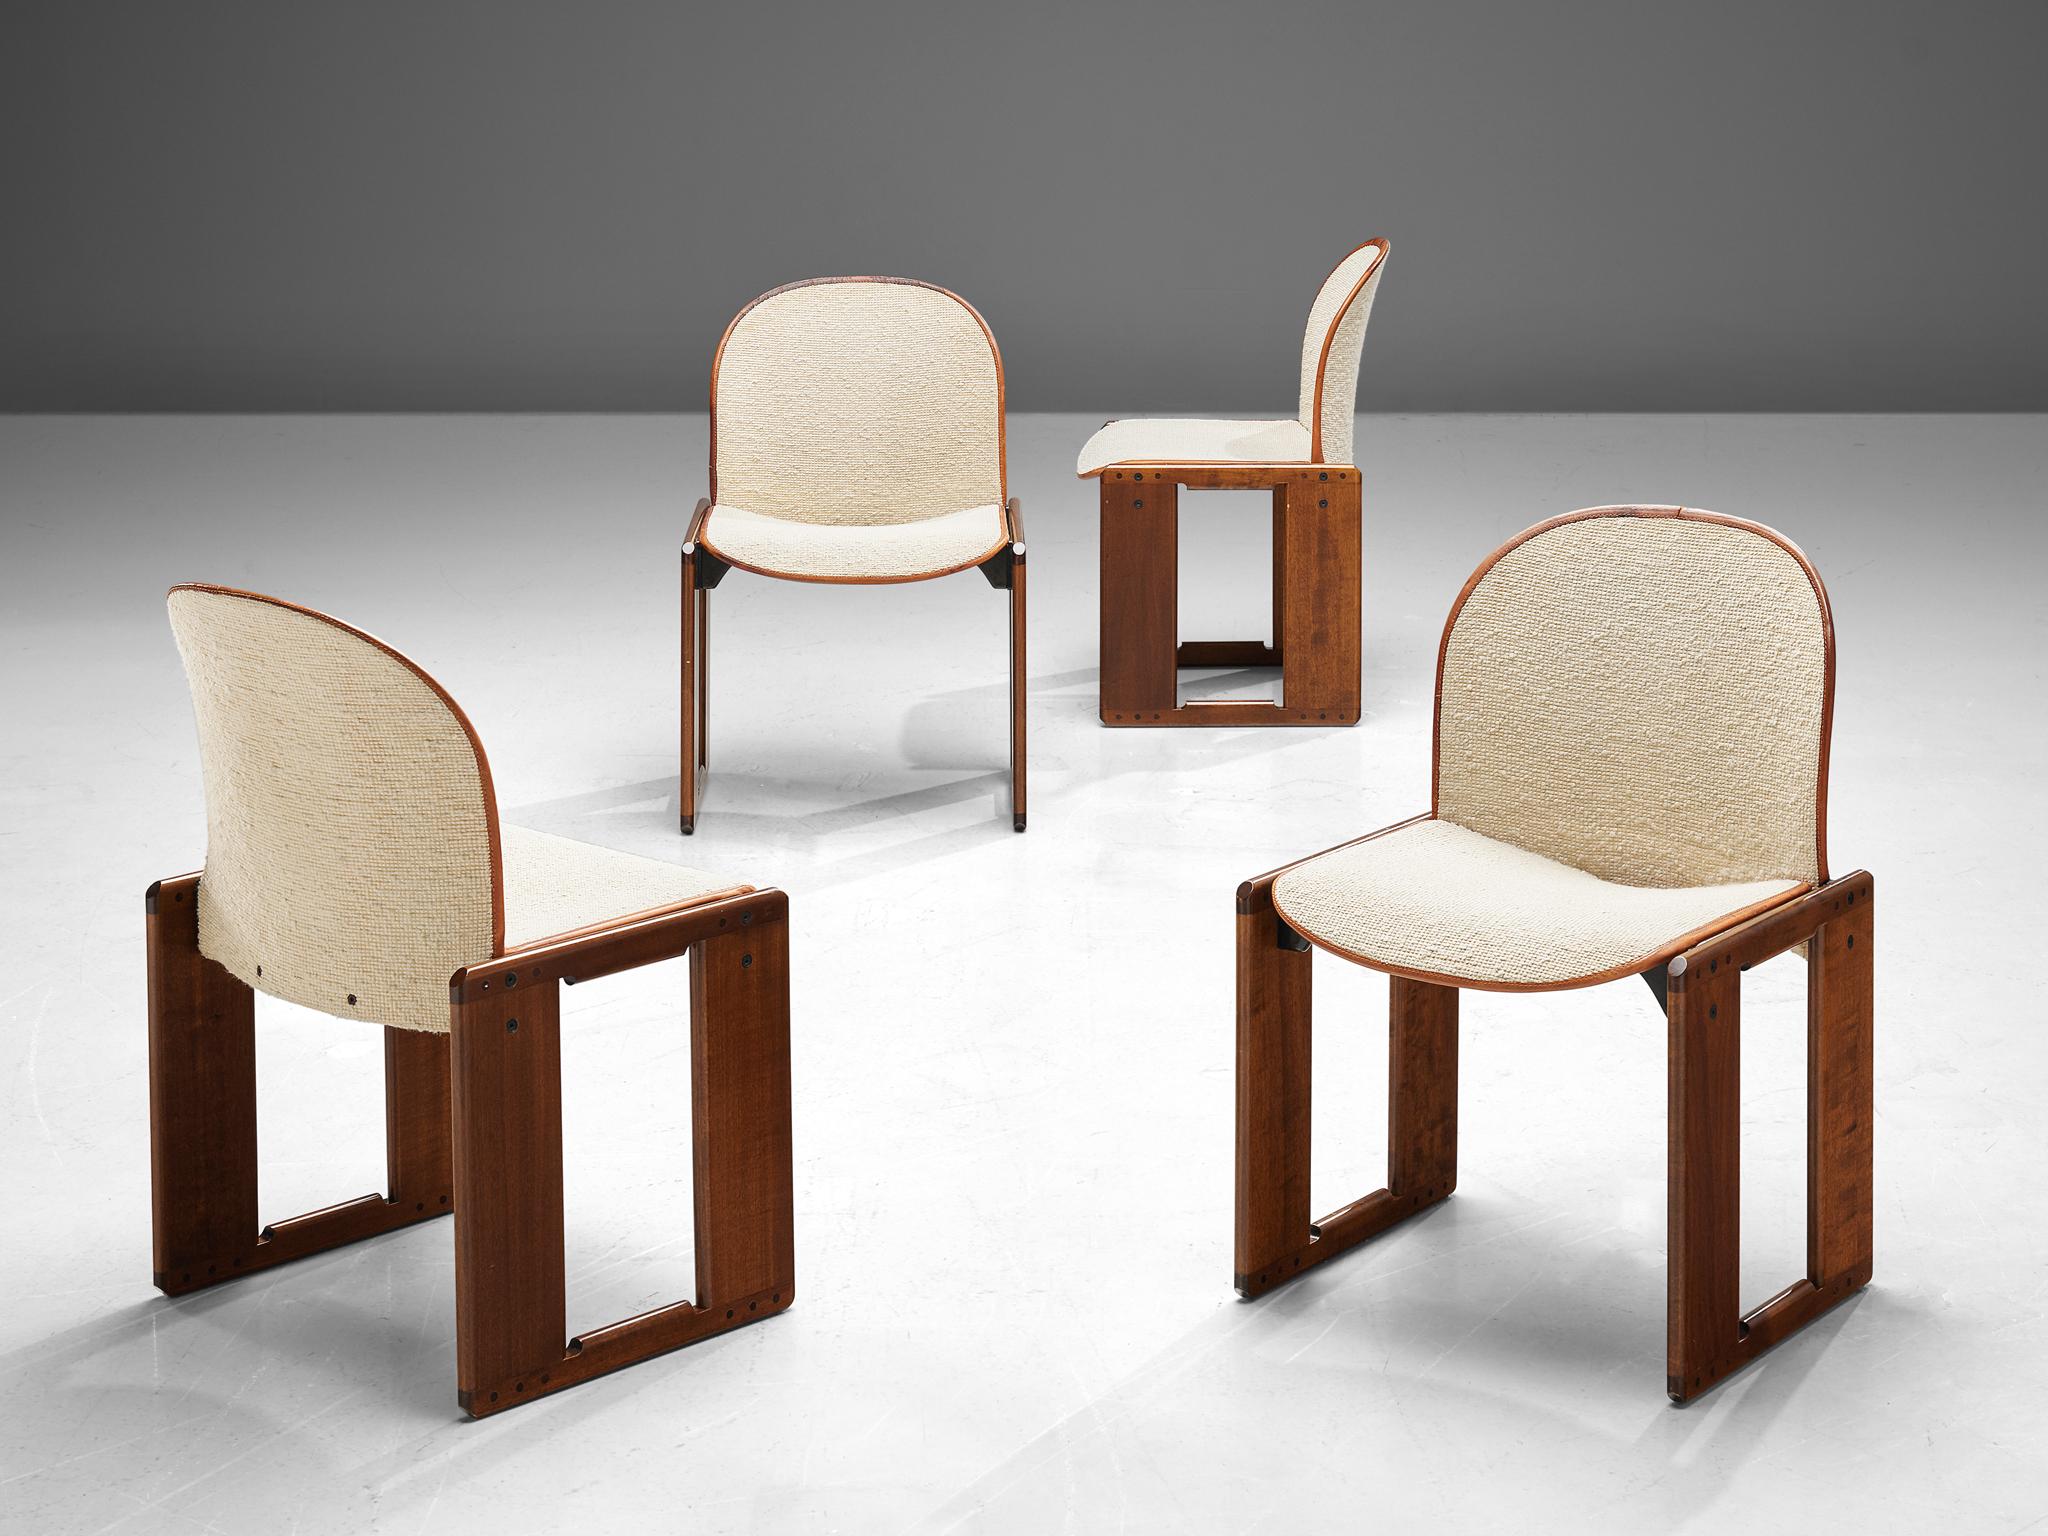 Afra and Tobia Scarpa for B&B Italia, set of four 'Dialogo' dining chairs, walnut, fabric and leather, Italy, 1974.

This set of four dining chairs is both slender and firm at the same time. The seat and back are covered in fabric and quite thin